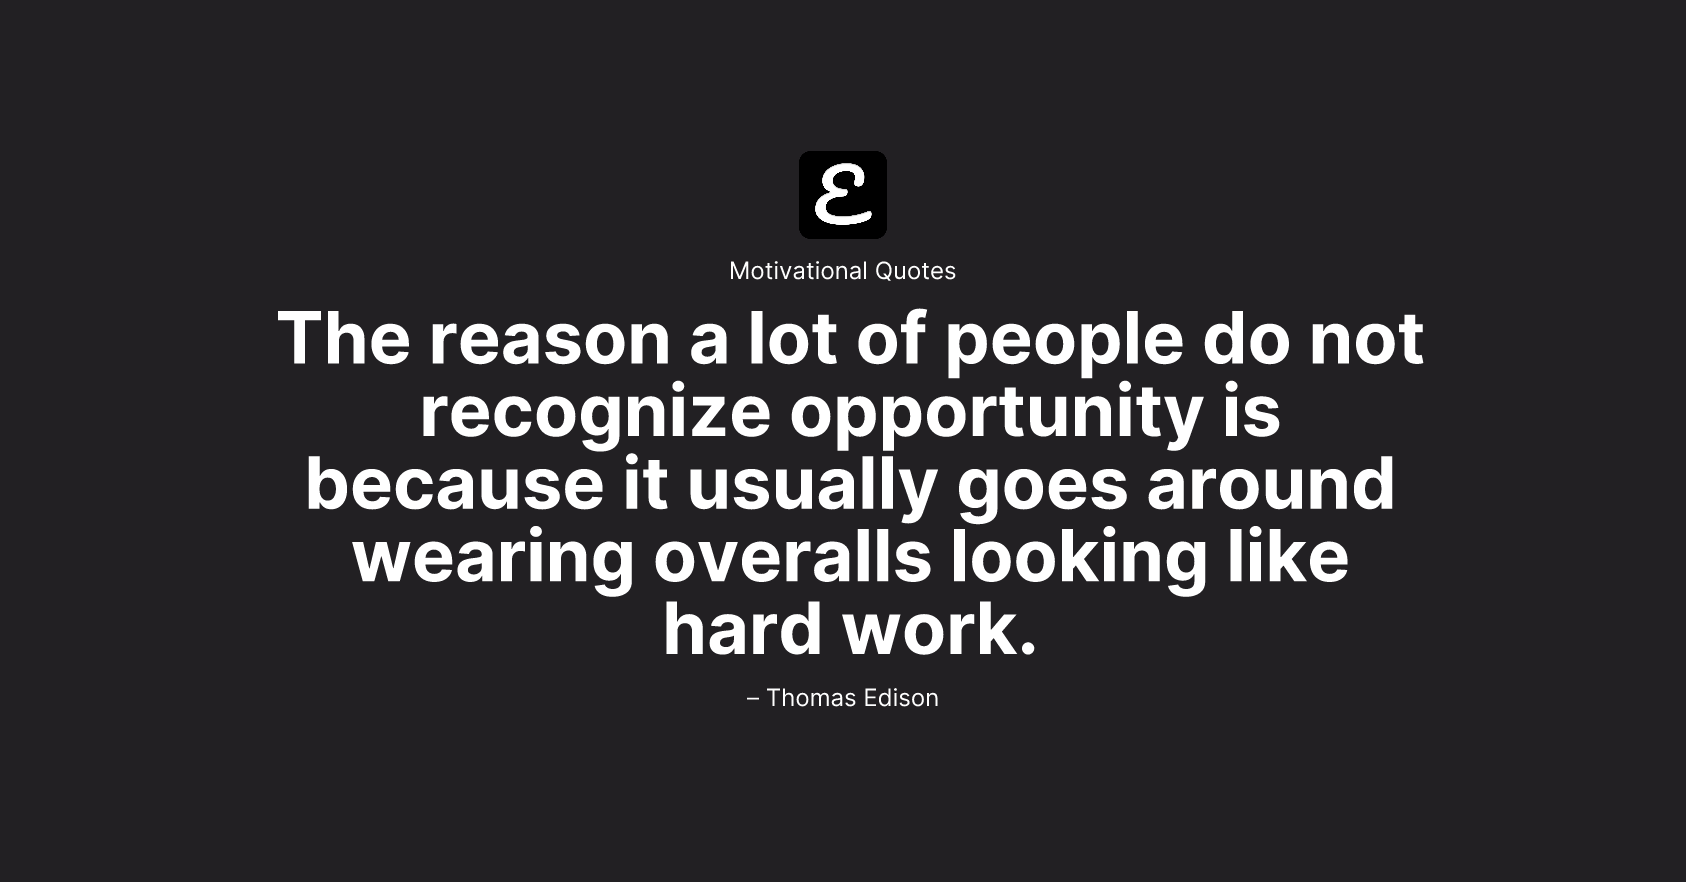 Thomas Edison - The reason a lot of people do not recognize opportunity is because it usually goes around wearing overalls looking like hard work.